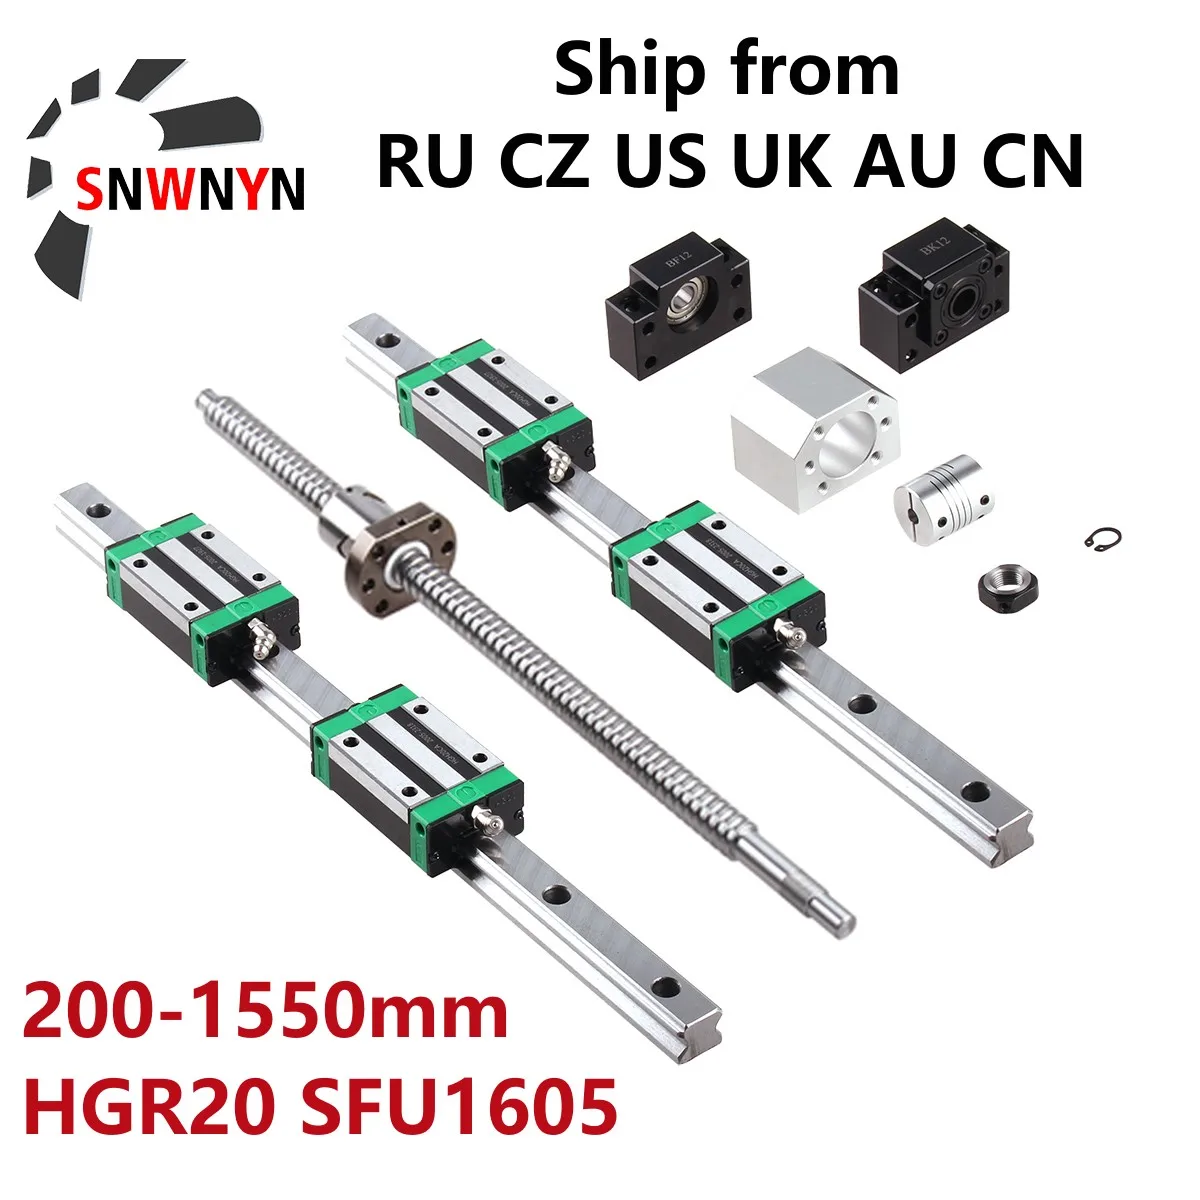 

2PC HGR20 Linear Square Rail+4PC HGH20CA Slides Carriage+1PC SFU1605 Ball Screw+BK/BF12 End Support+Coupling+Nut Housing CNC Set